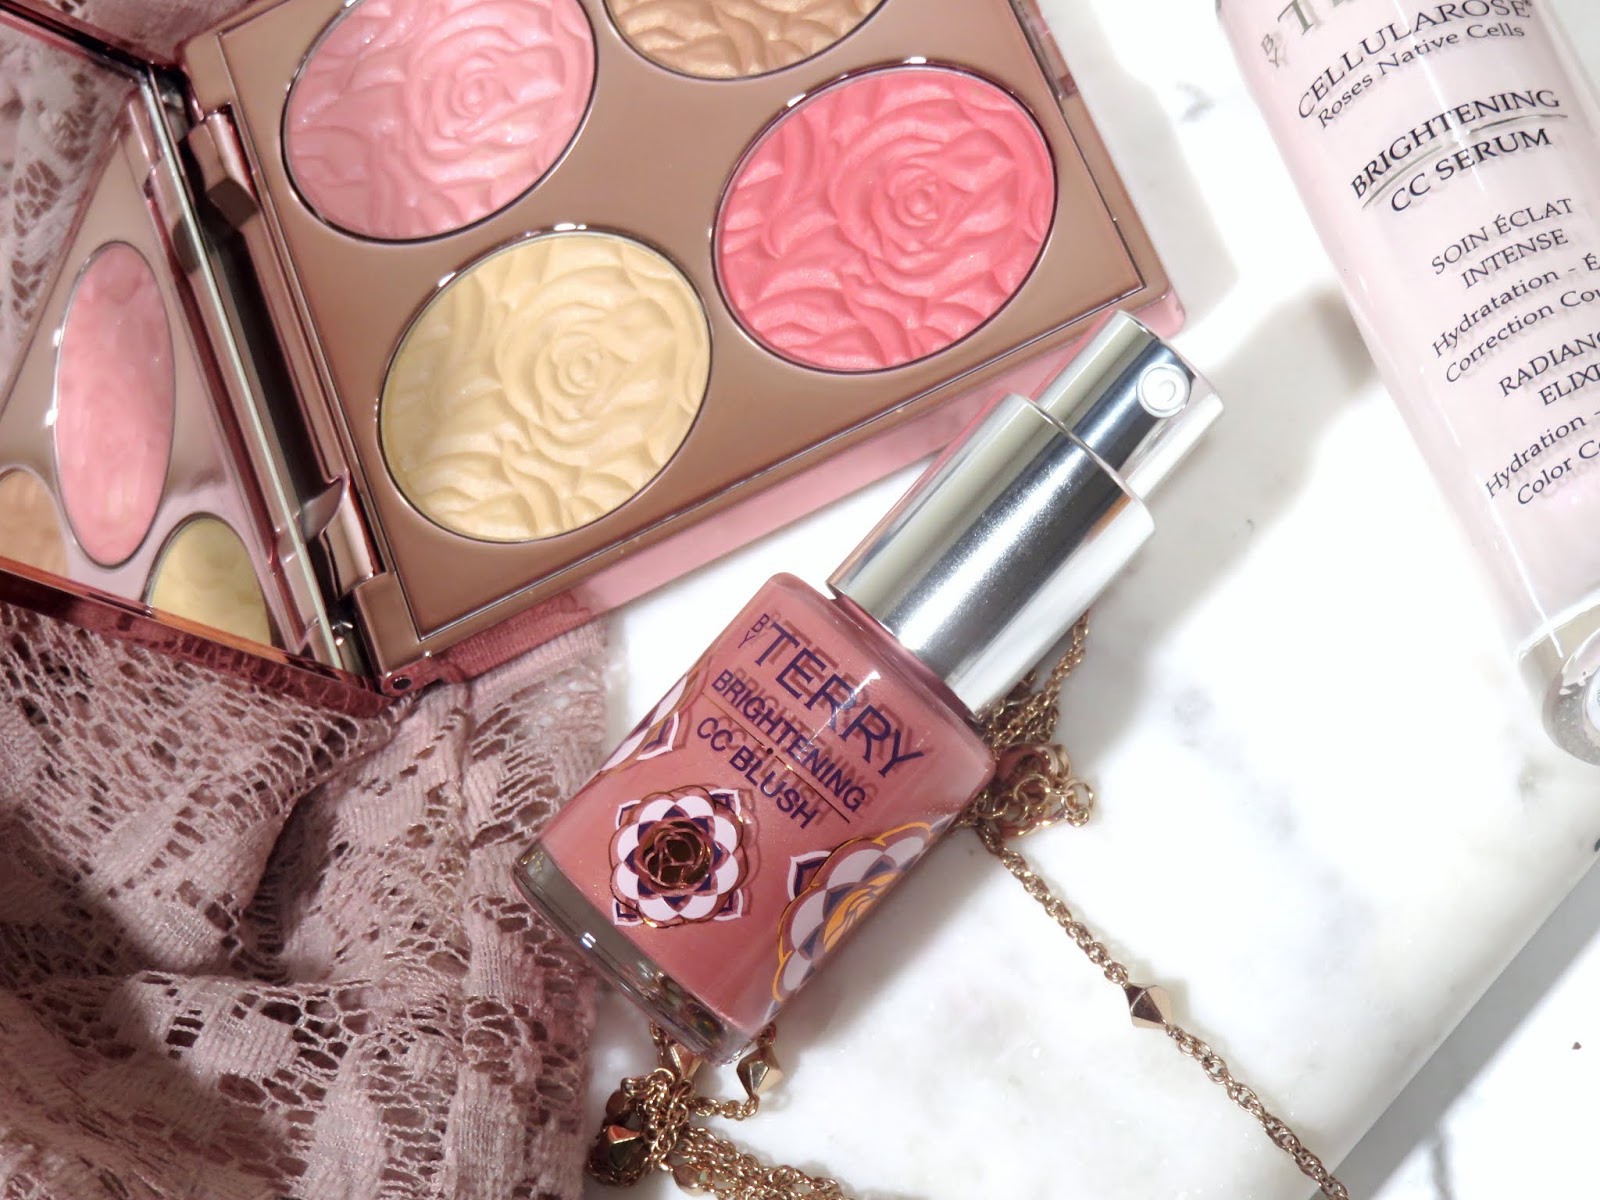 By Terry Brightening CC Blush Illuminating Blusher Review and Swatches